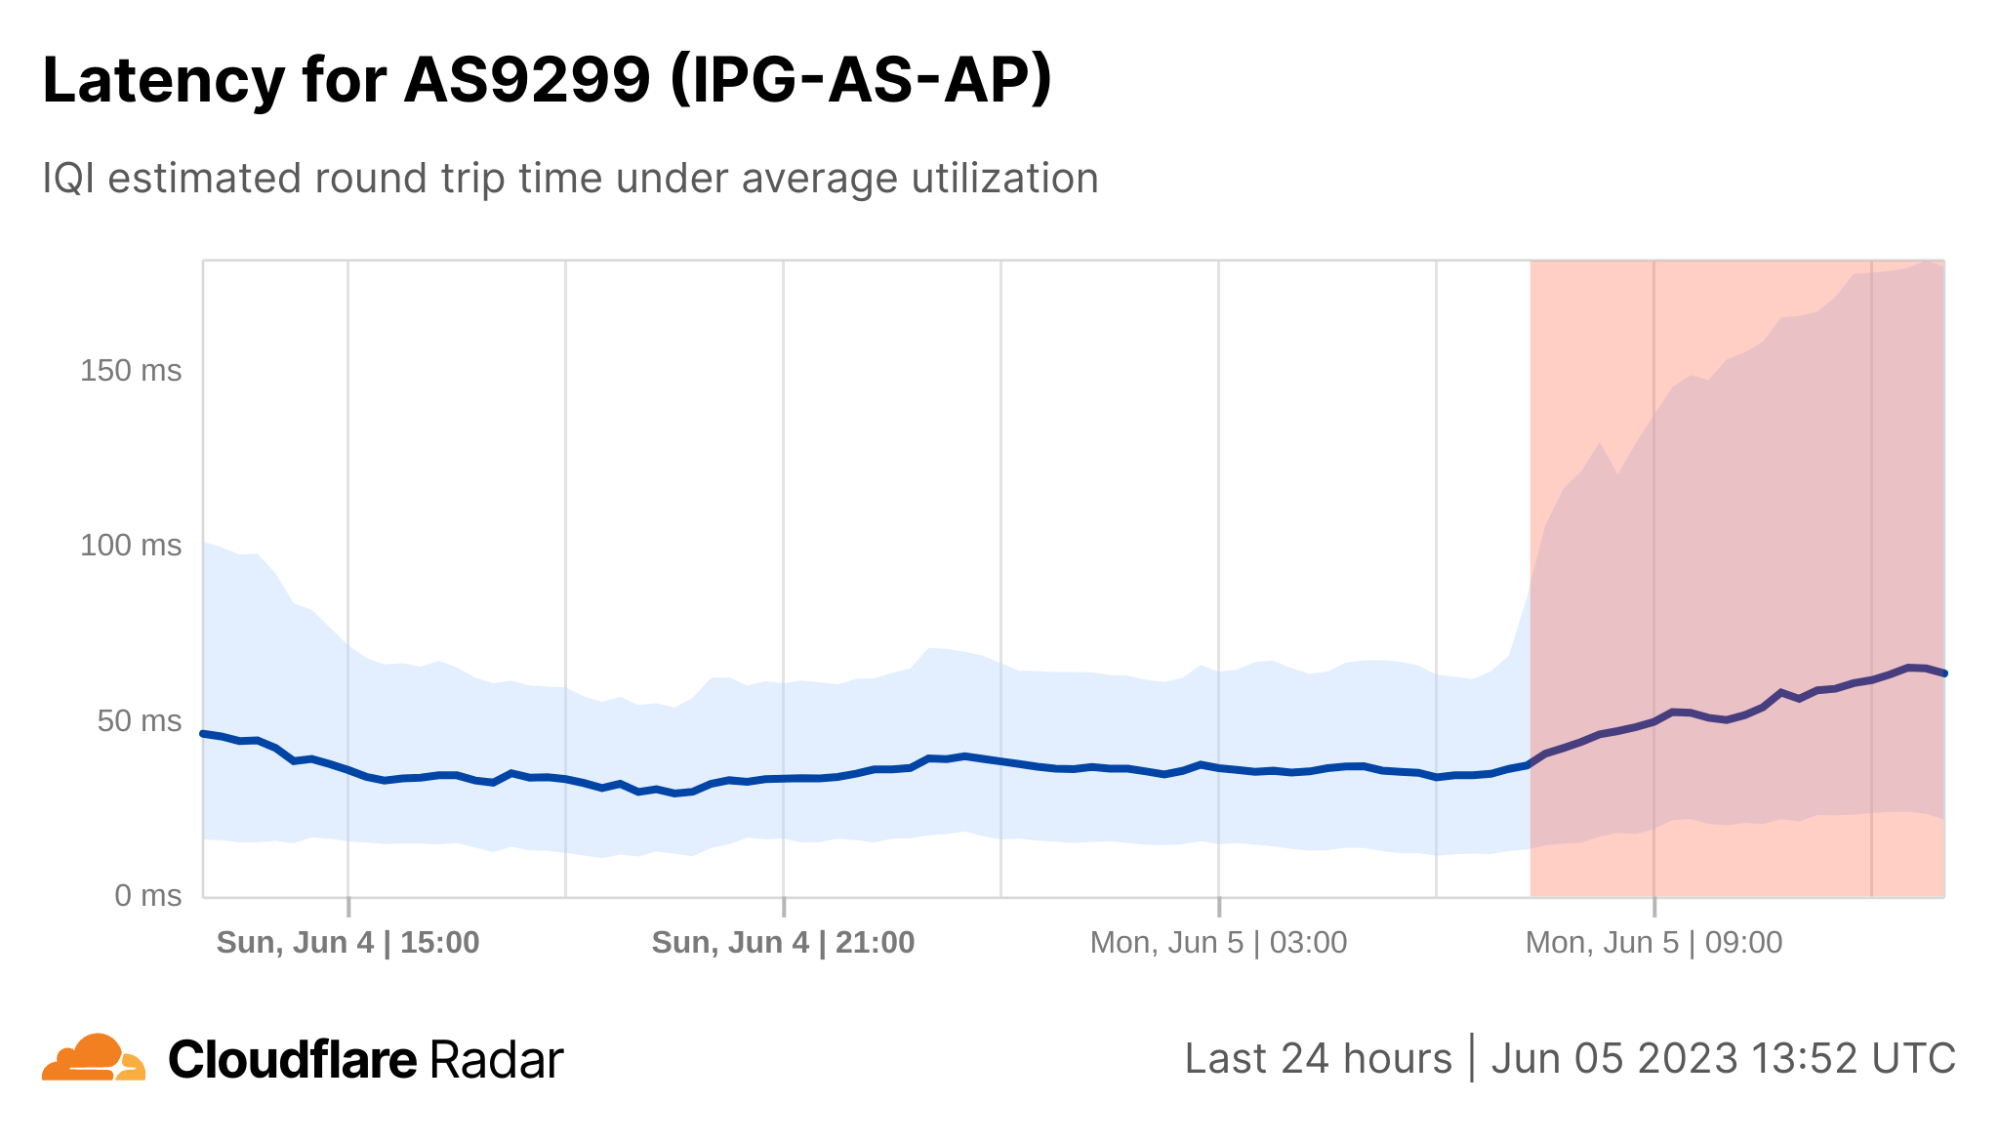 Introducing the Cloudflare Radar Internet Quality Page